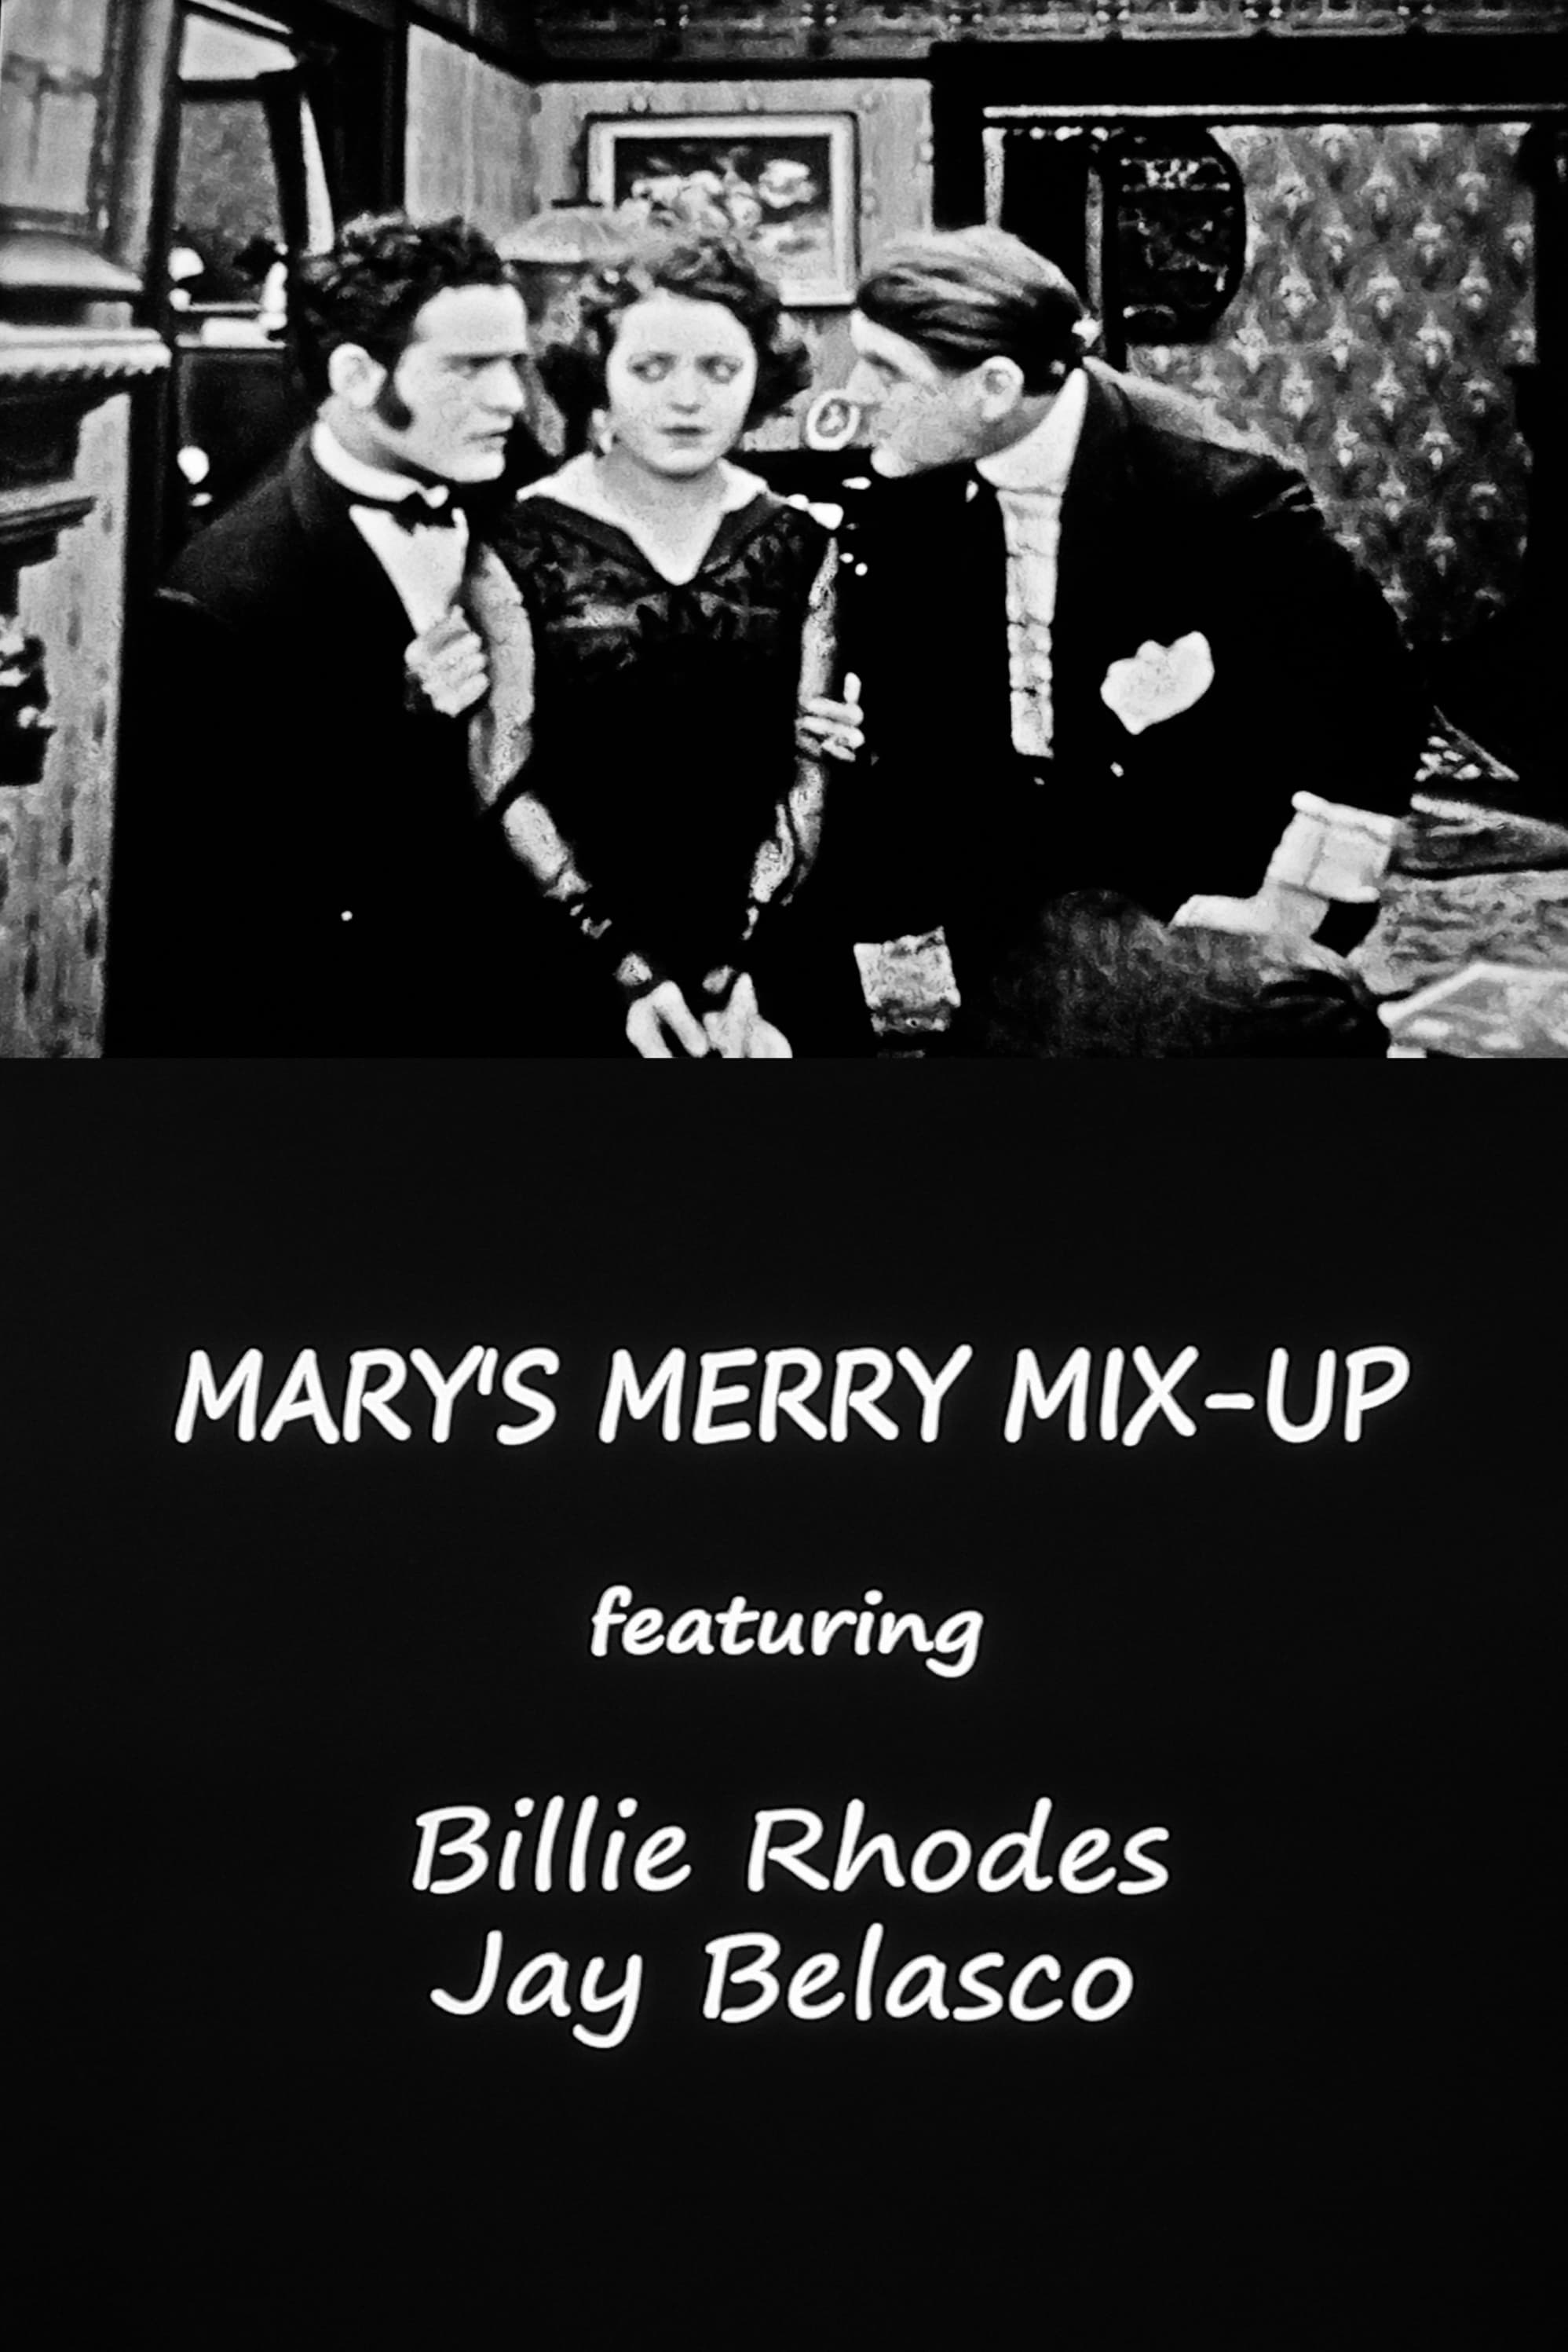 Mary's Merry Mix-Up